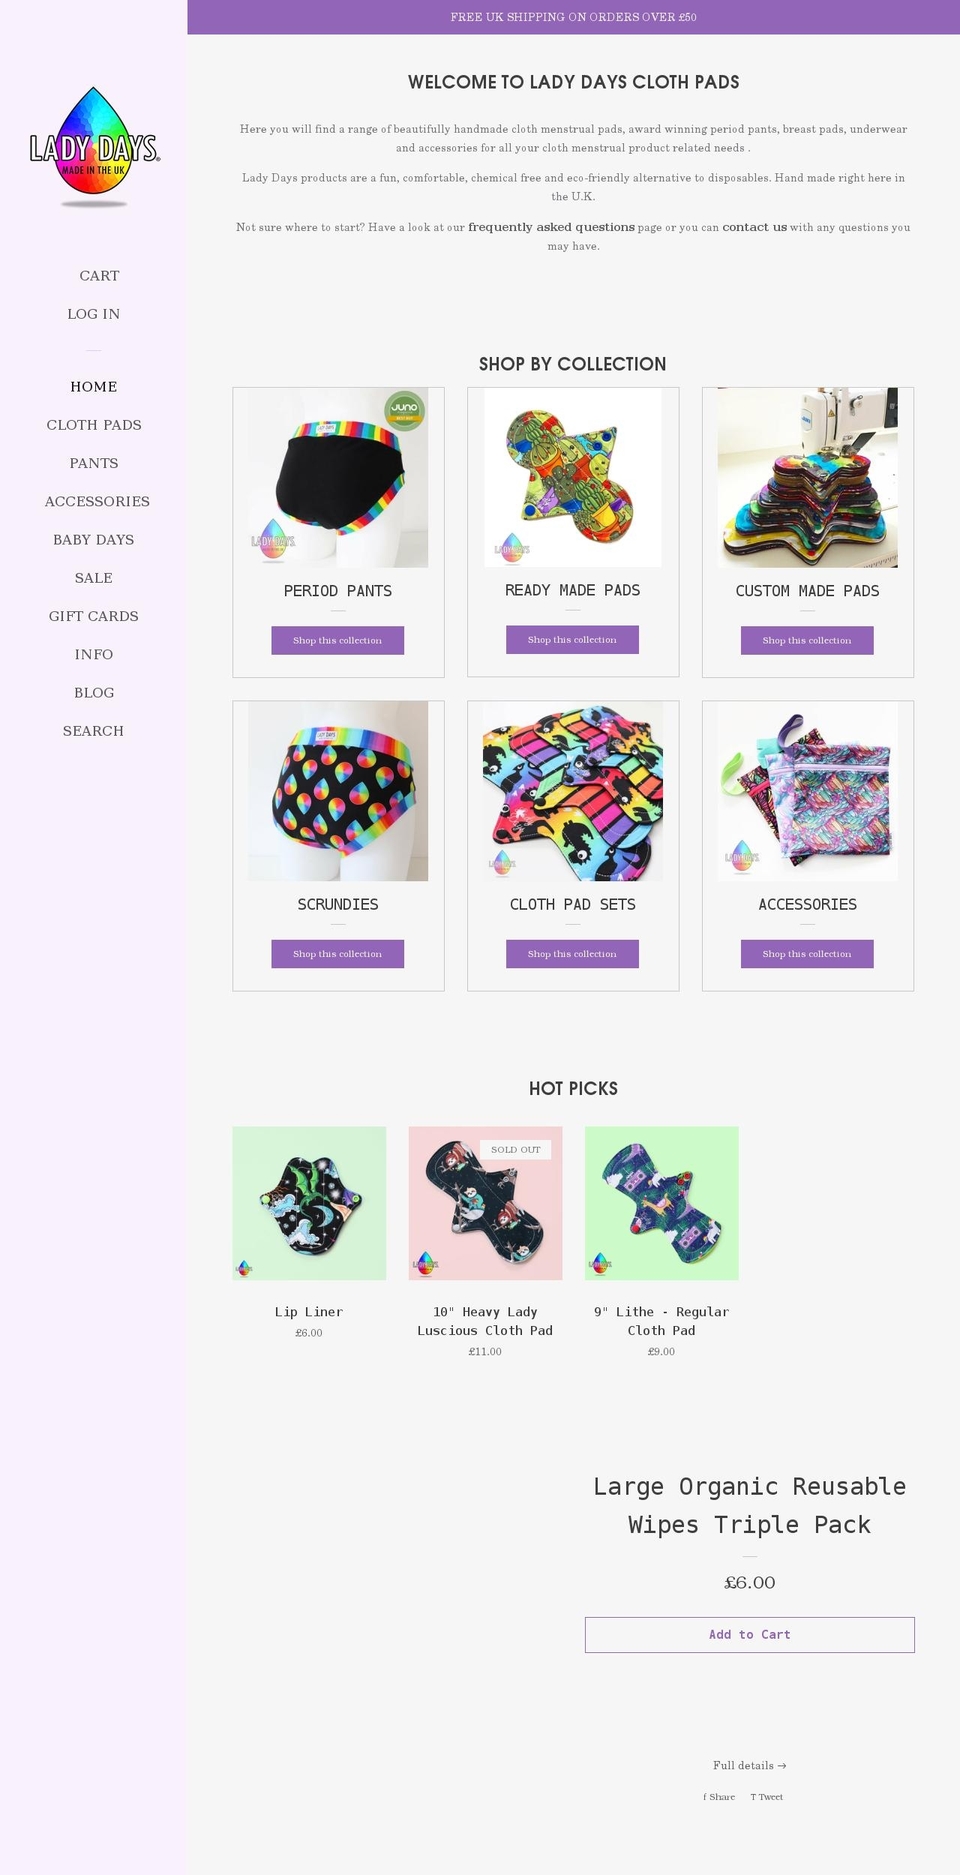 Copy of Pop Shopify theme site example ladydaysclothpads.co.uk